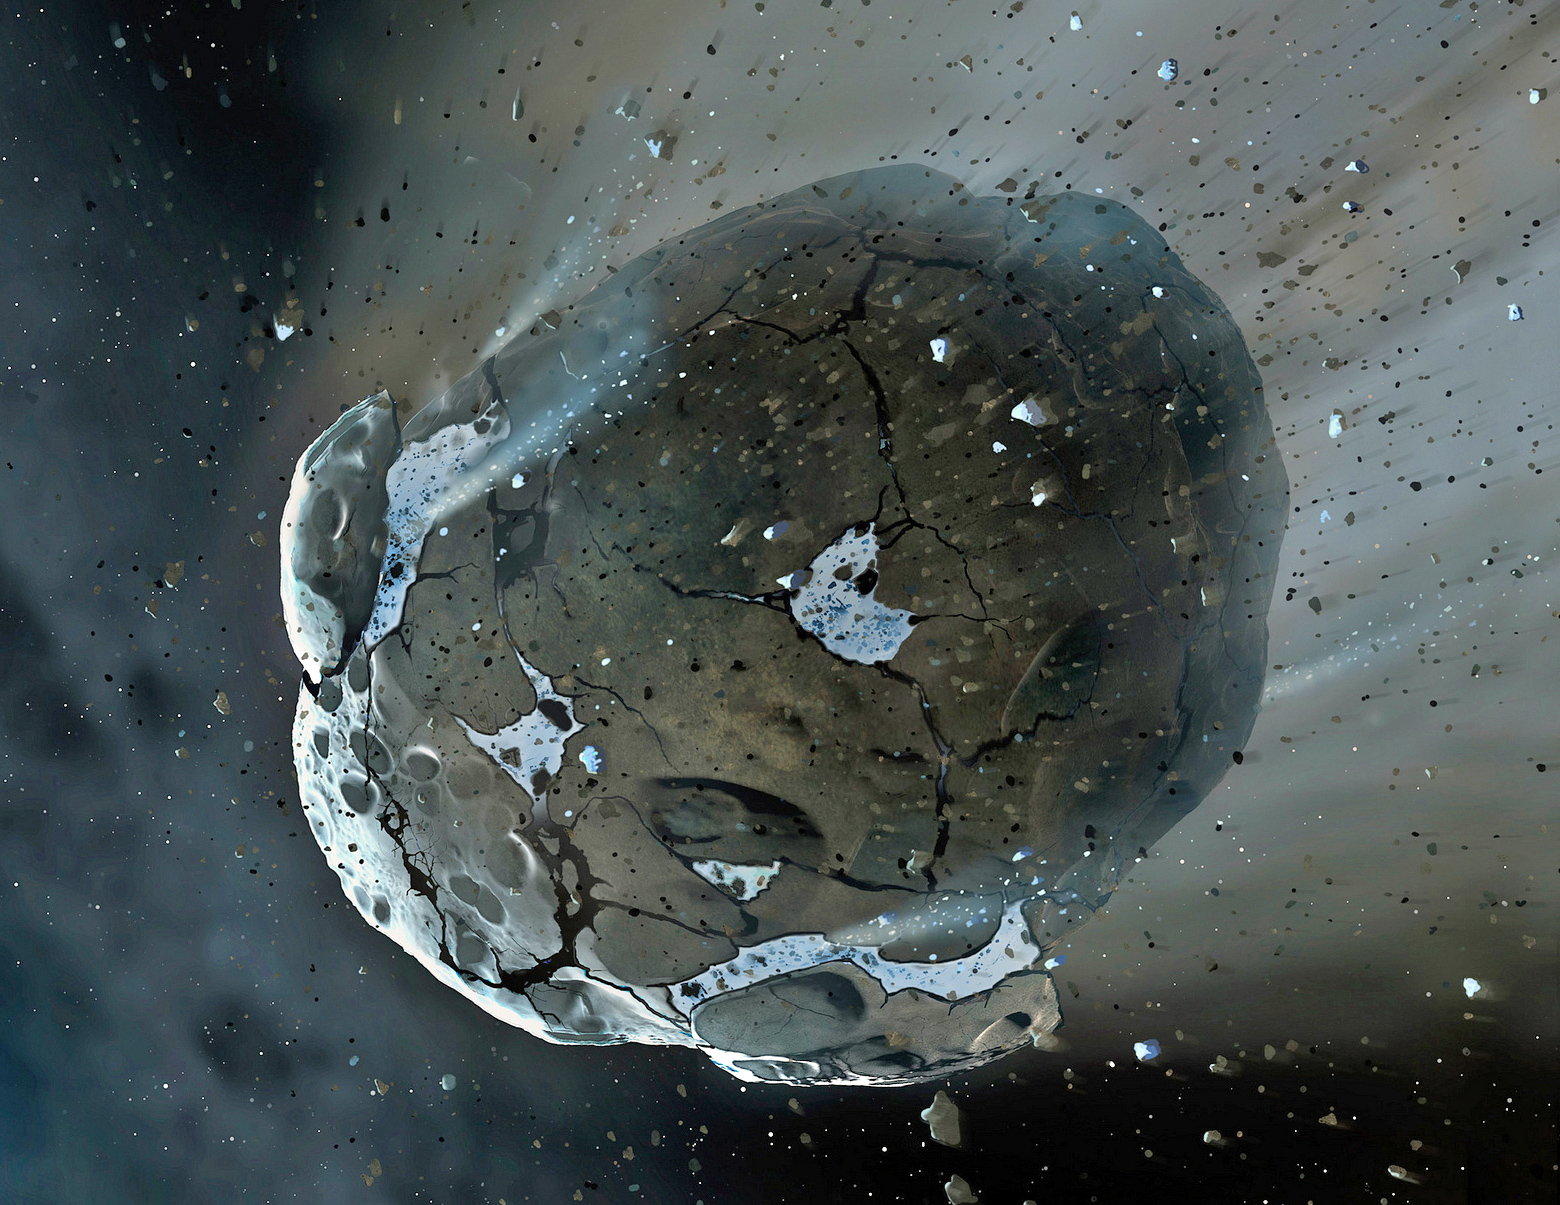 A colossal asteroid will cruise by Earth today, and you’ll actually be